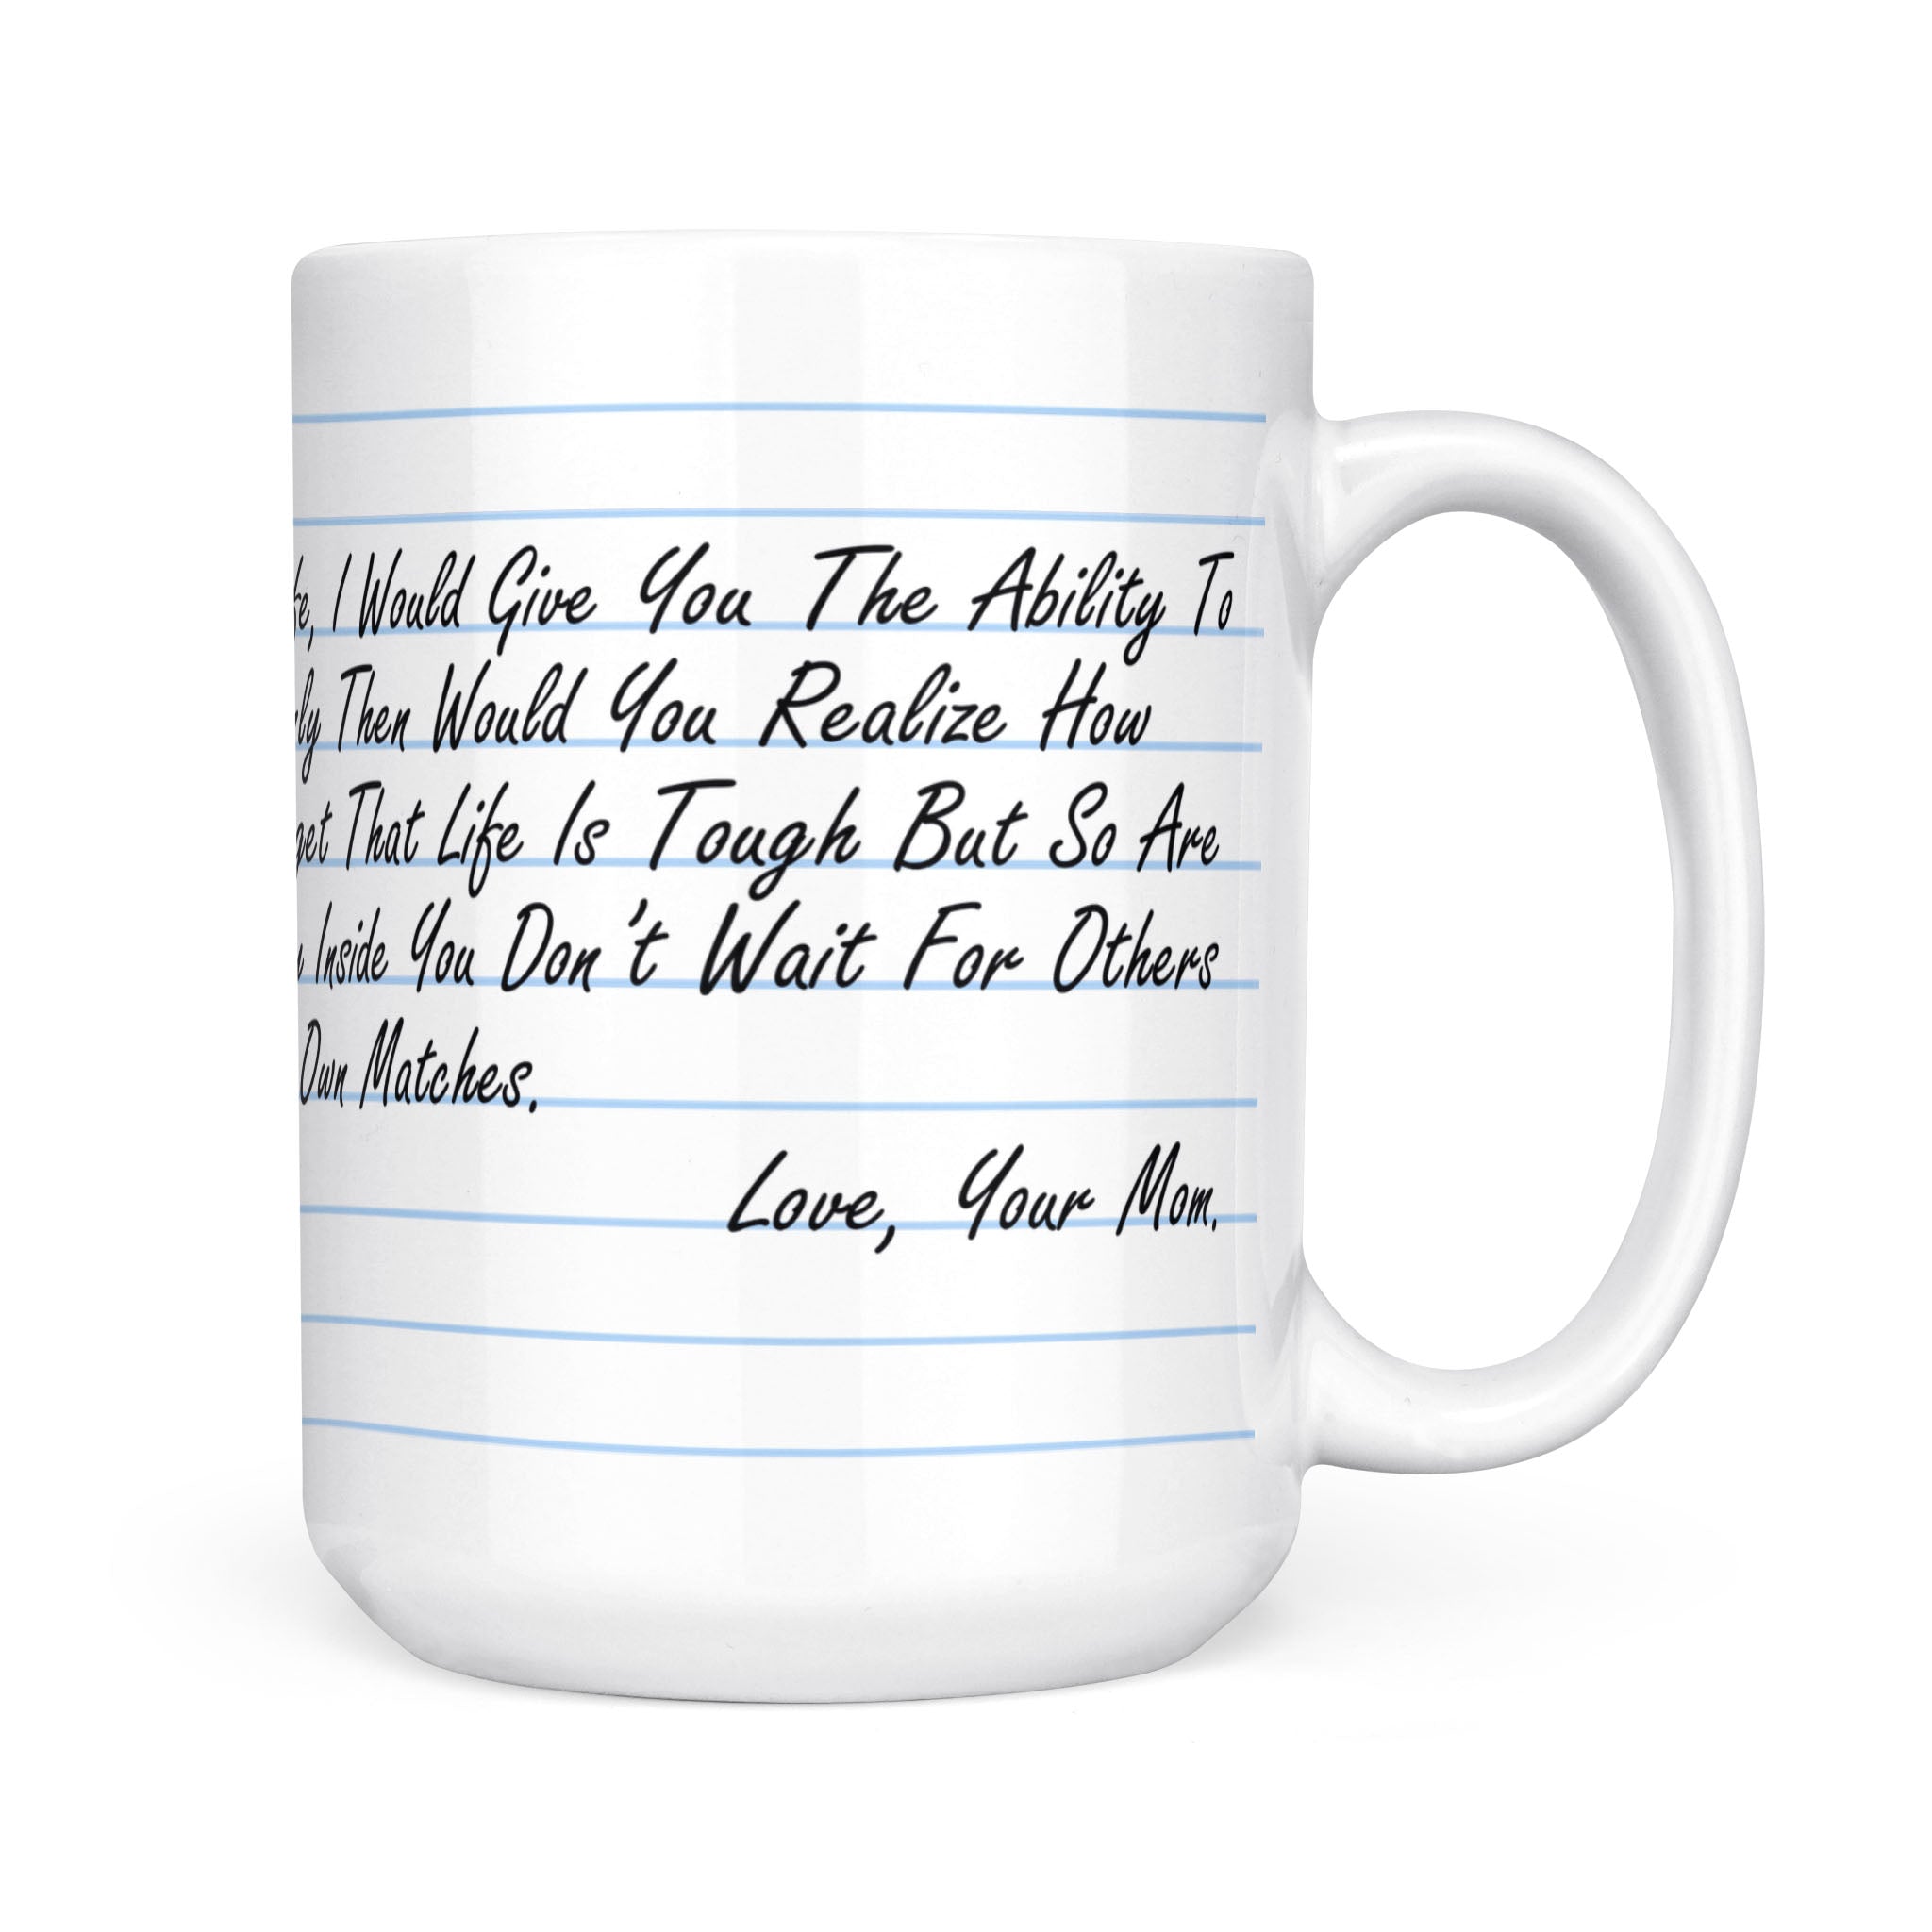 Ion Mug Review  Our Honest Look at This GREAT Gift Idea!